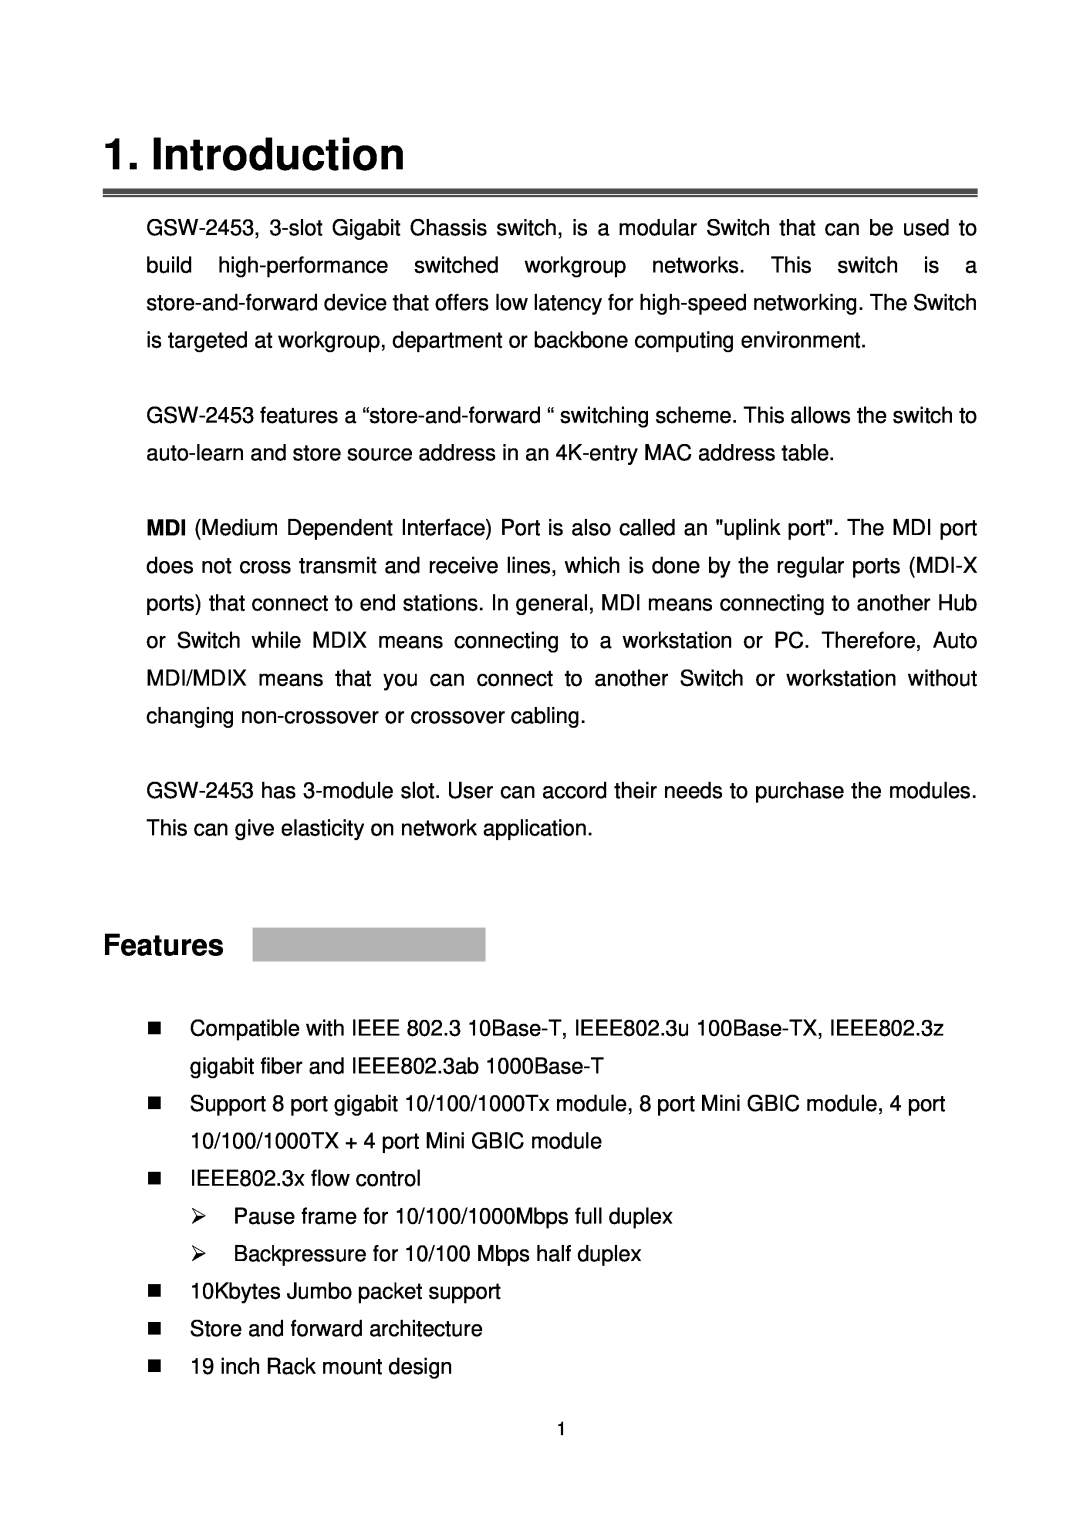 LevelOne Gigabit Chassis switch, GSW-2453 manual Introduction, Features 